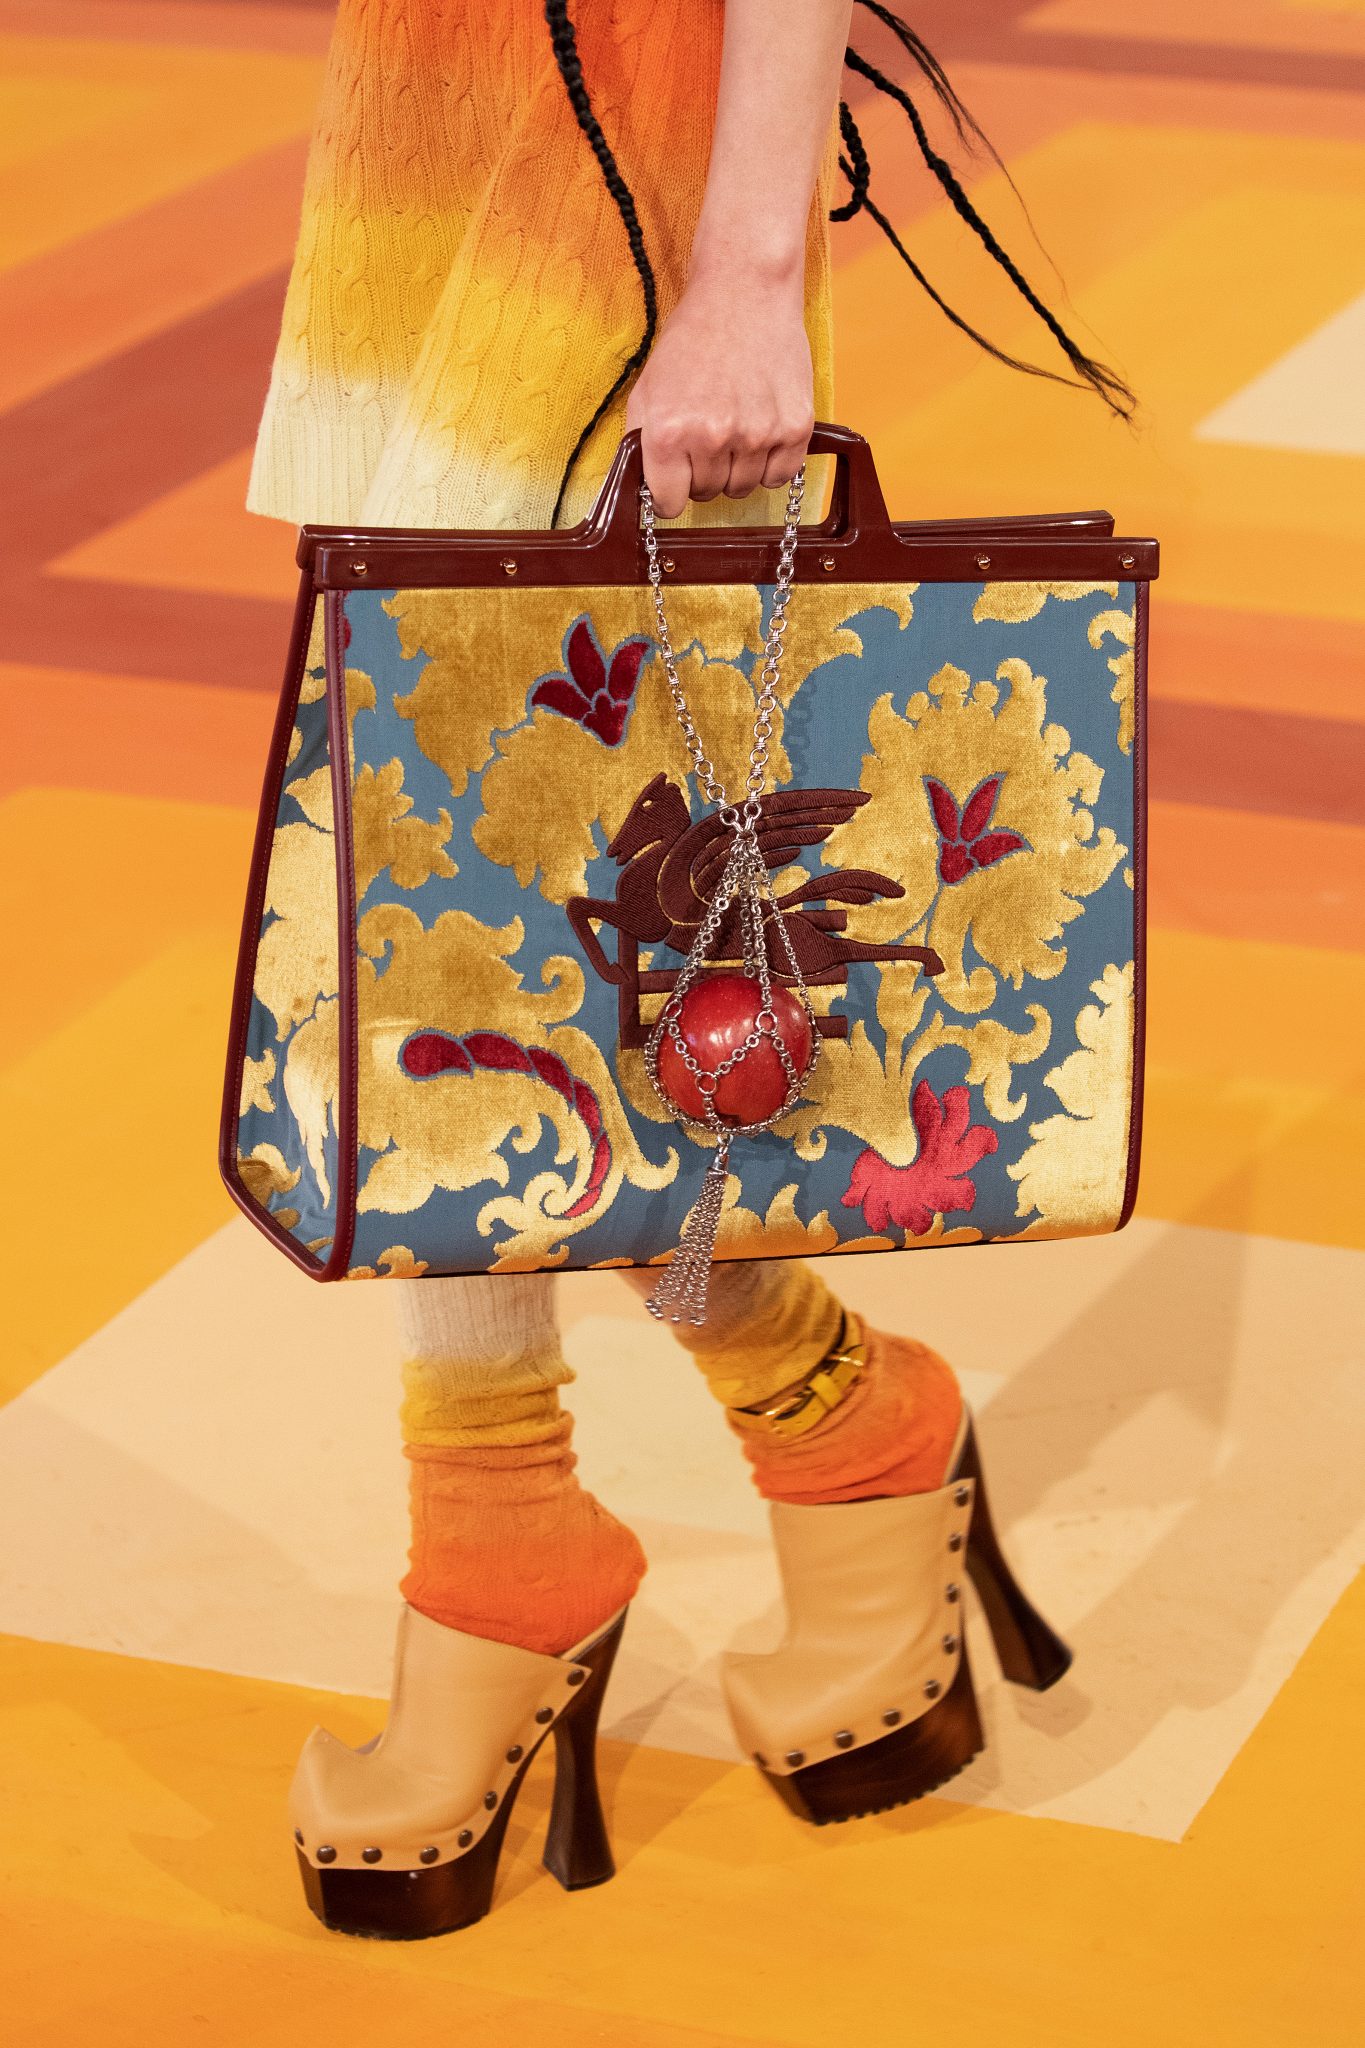 Introducing the Vela Bag from @etro Spring-Summer 2023 Collection